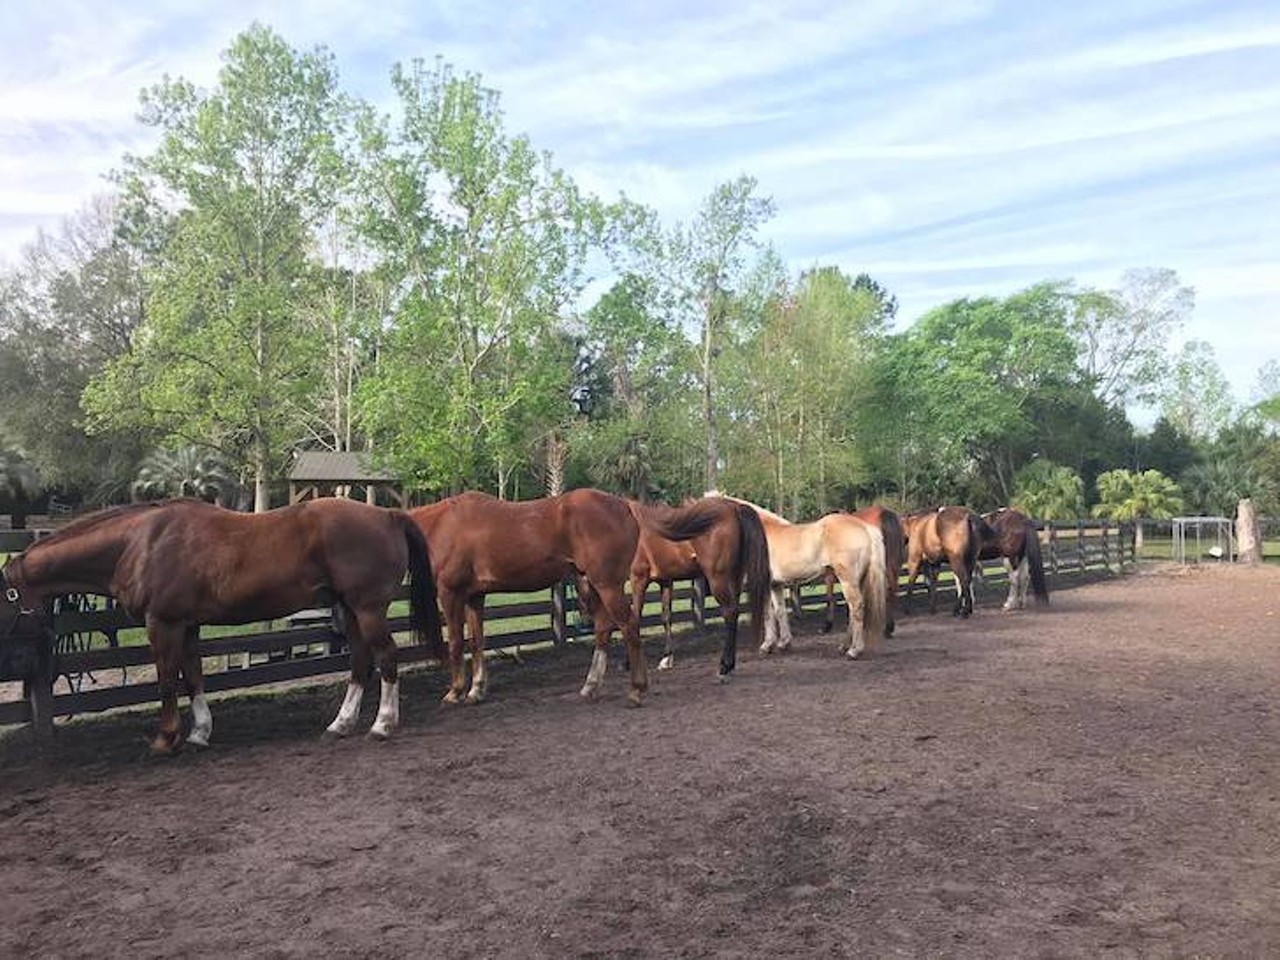 Hidden Palm Ranch 
1410 Oakway Sanford, FL 32773, 407-620-7880
Reserve a spot to ride in a guided group tour on horseback or a private trail ride through the Lake Jesup conservation area. You can also book a one-on-one horse experience to groom and spend time with one of the family owned horses in the business. 
Photo via Hidden Palms Ranch/Facebook